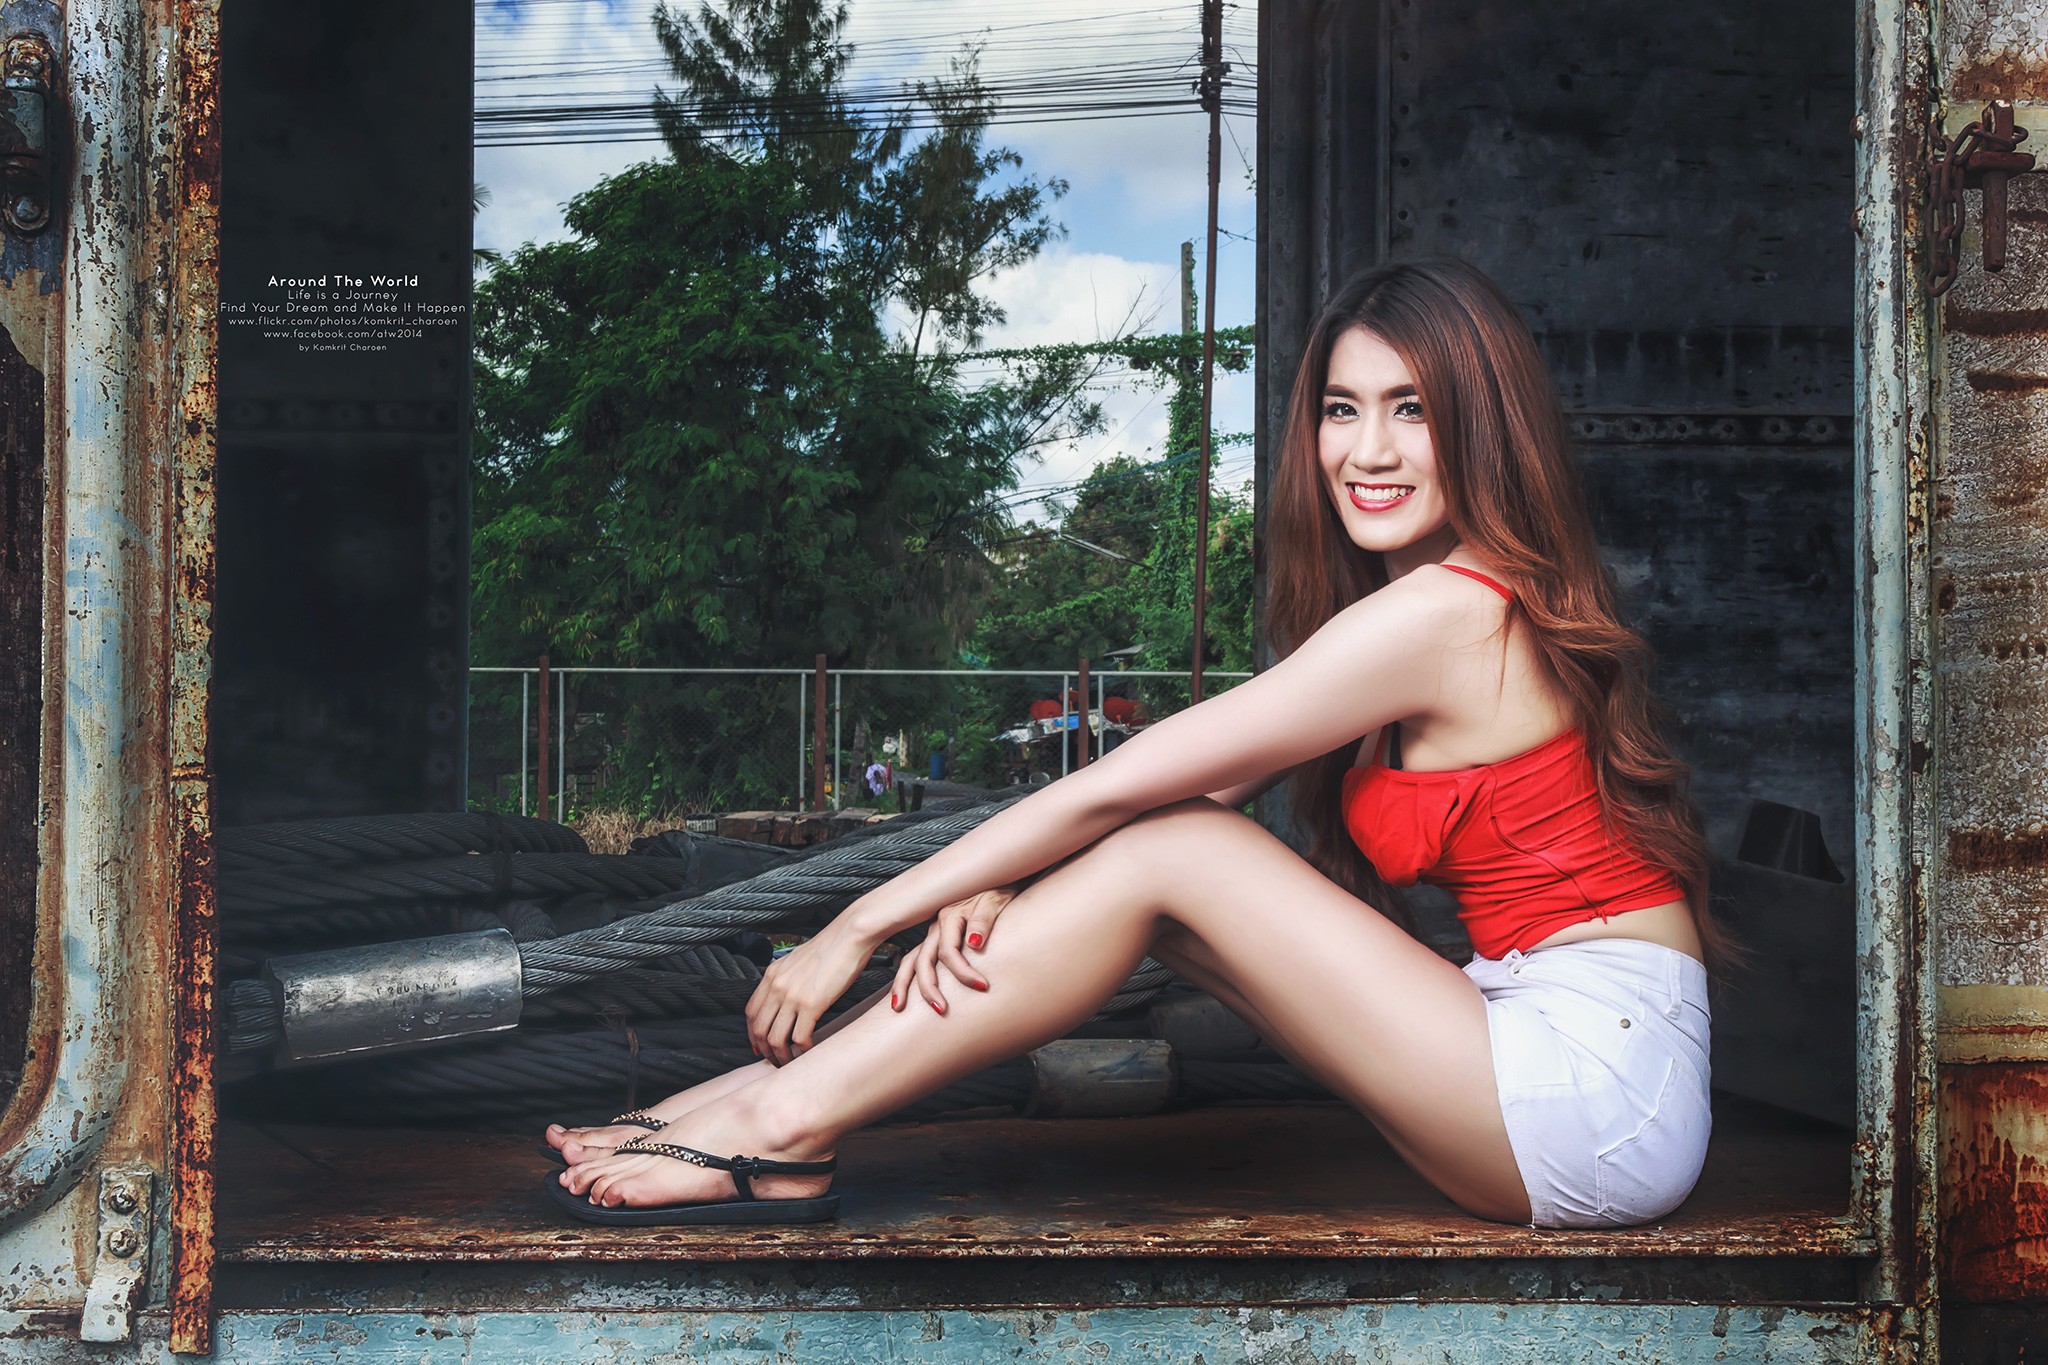 People 2048x1365 flip flops women Asian redhead sitting camisole jean shorts sandals model red tops red lipstick red nails metal rust train vehicle looking at viewer